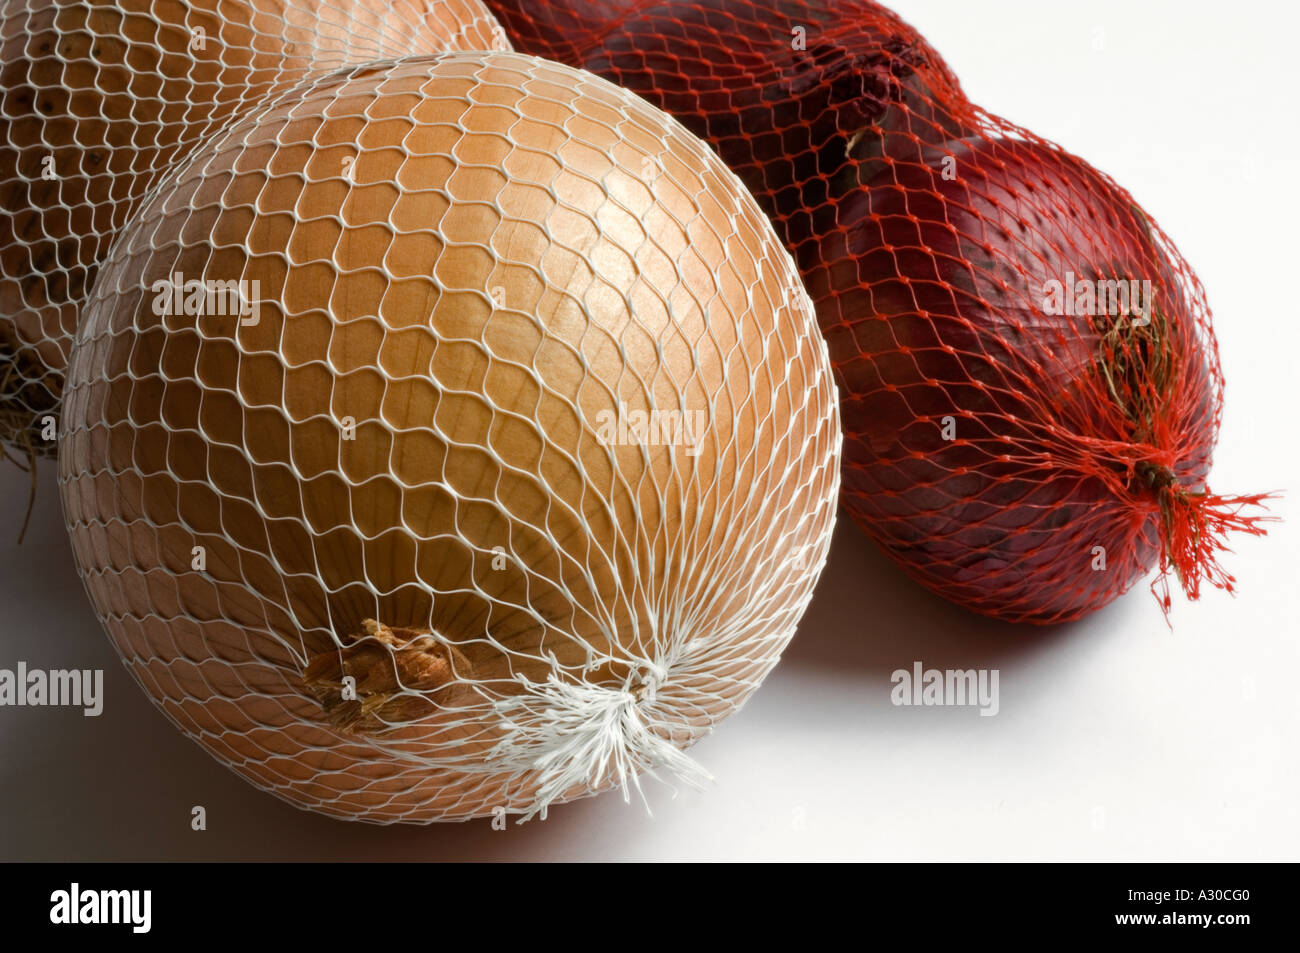 Spanish and Red Onions in mesh bags against white studio background Stock Photo